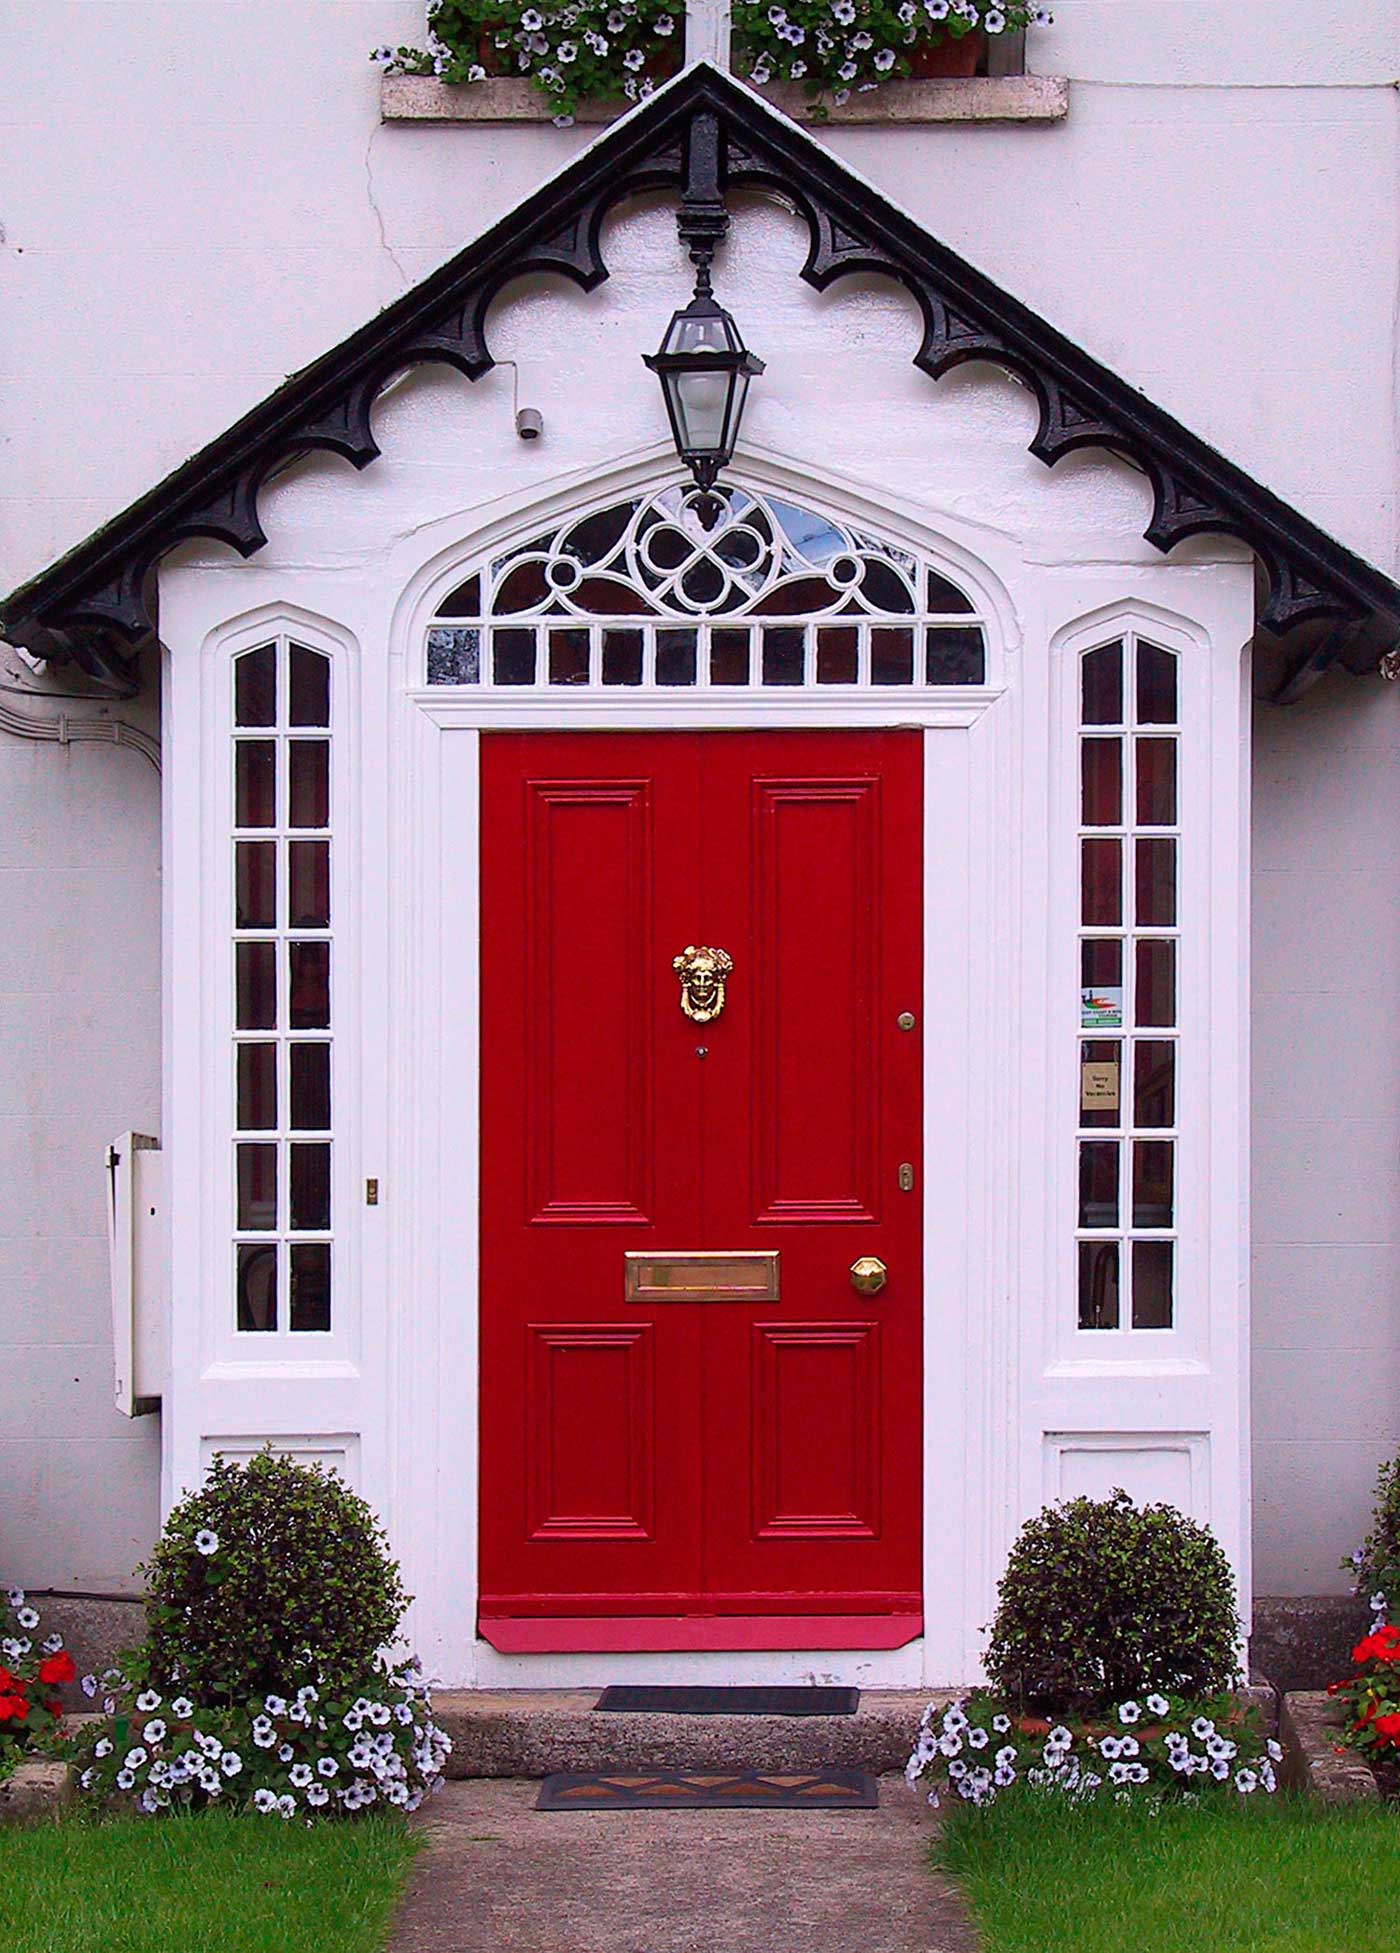 Exterior Design Traditional Home Exterior Design Decorated With Traditional Red Front Door Ideas Made From Wooden Material And Green Landscaping Edging Exterior Red Front Door As Surprising Door Design For Modern Home